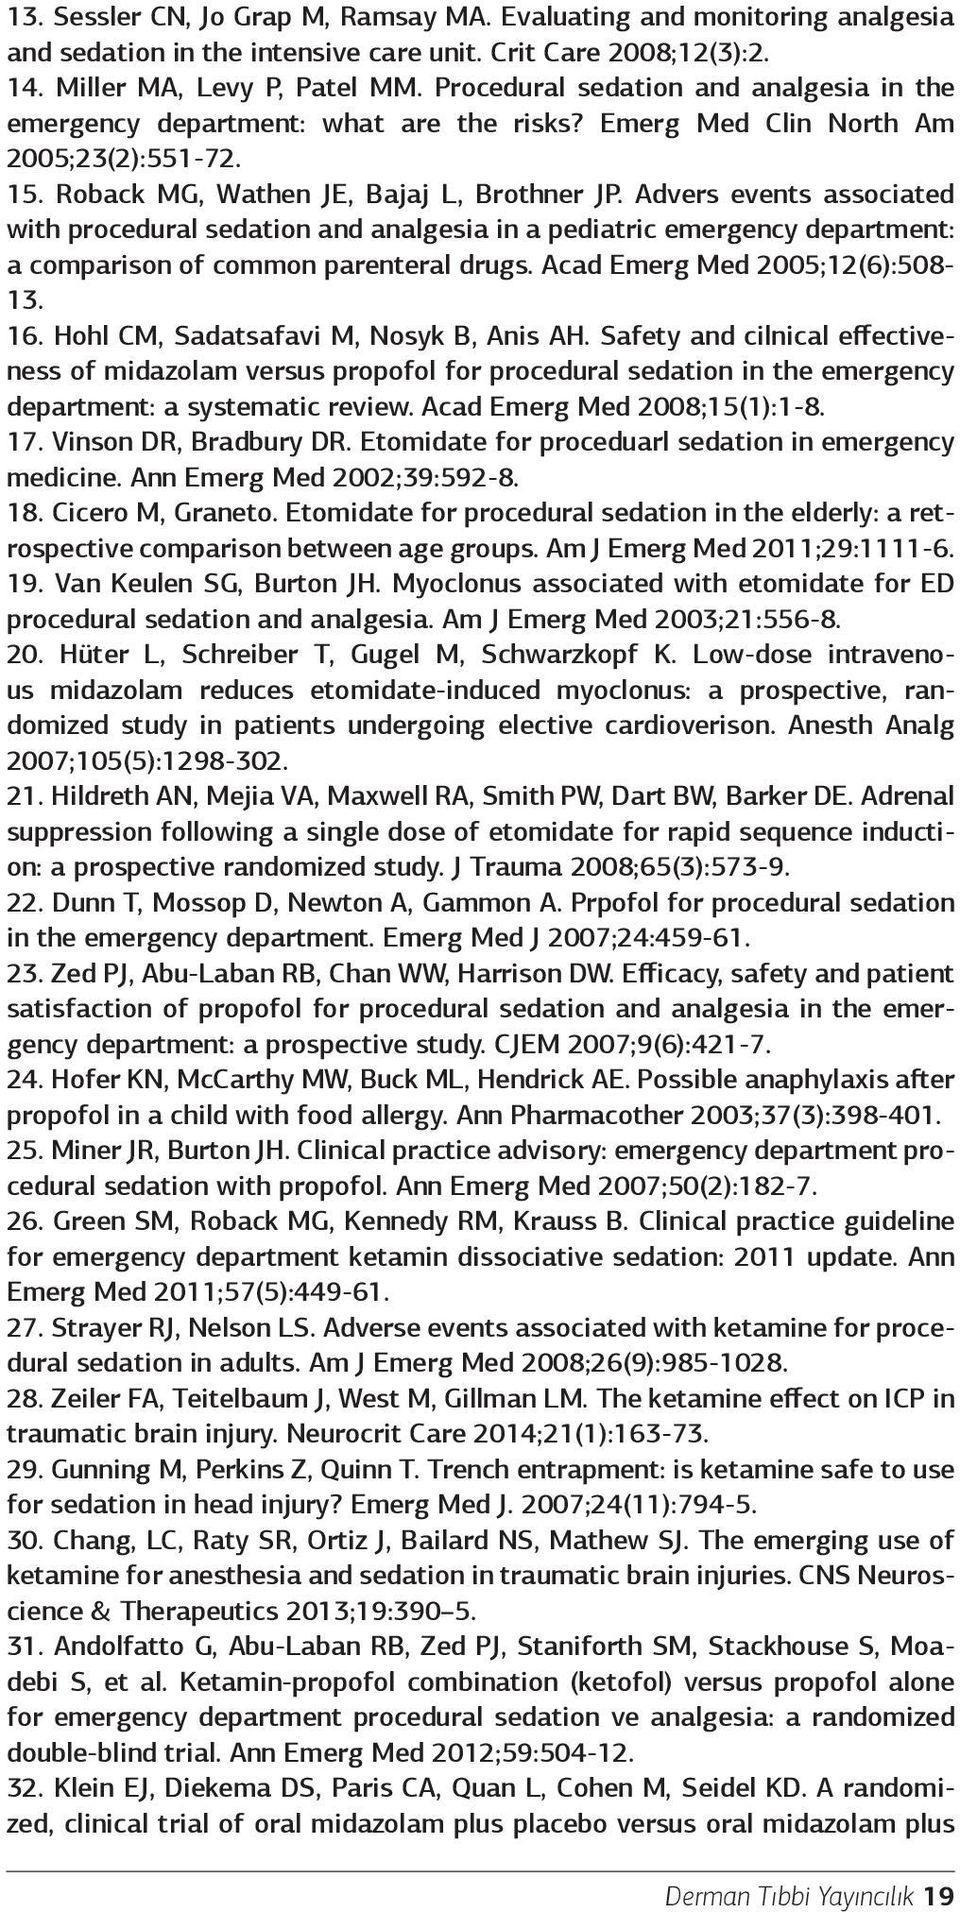 Advers events associated with procedural sedation and analgesia in a pediatric emergency department: a comparison of common parenteral drugs. Acad Emerg Med 2005;12(6):508-13. 16.